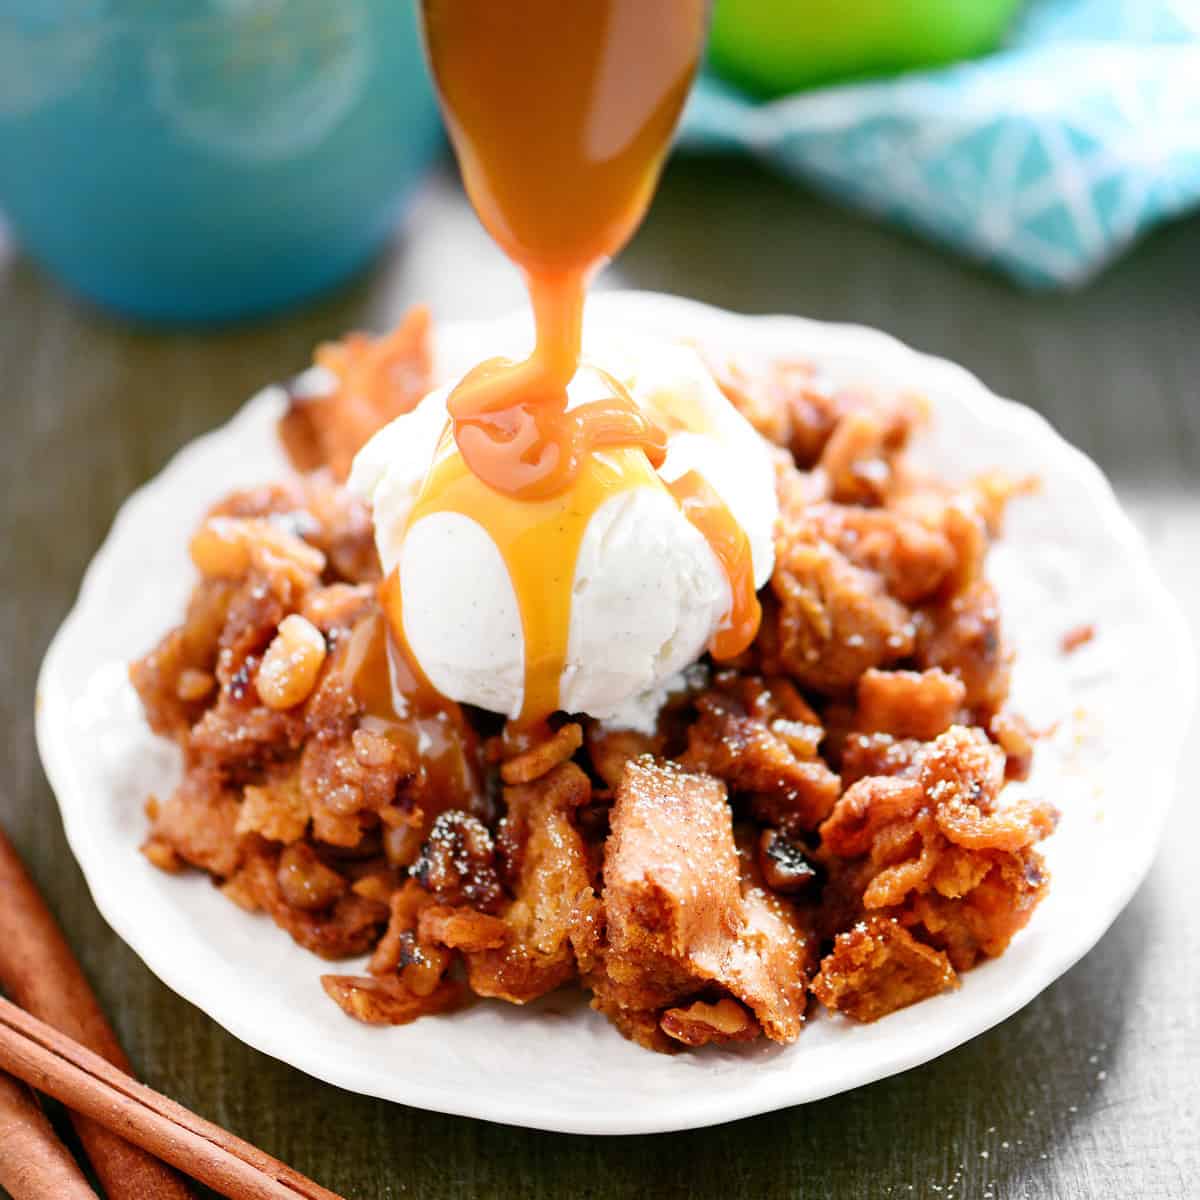 A spoon drizzles caramel on to apple bread pudding.